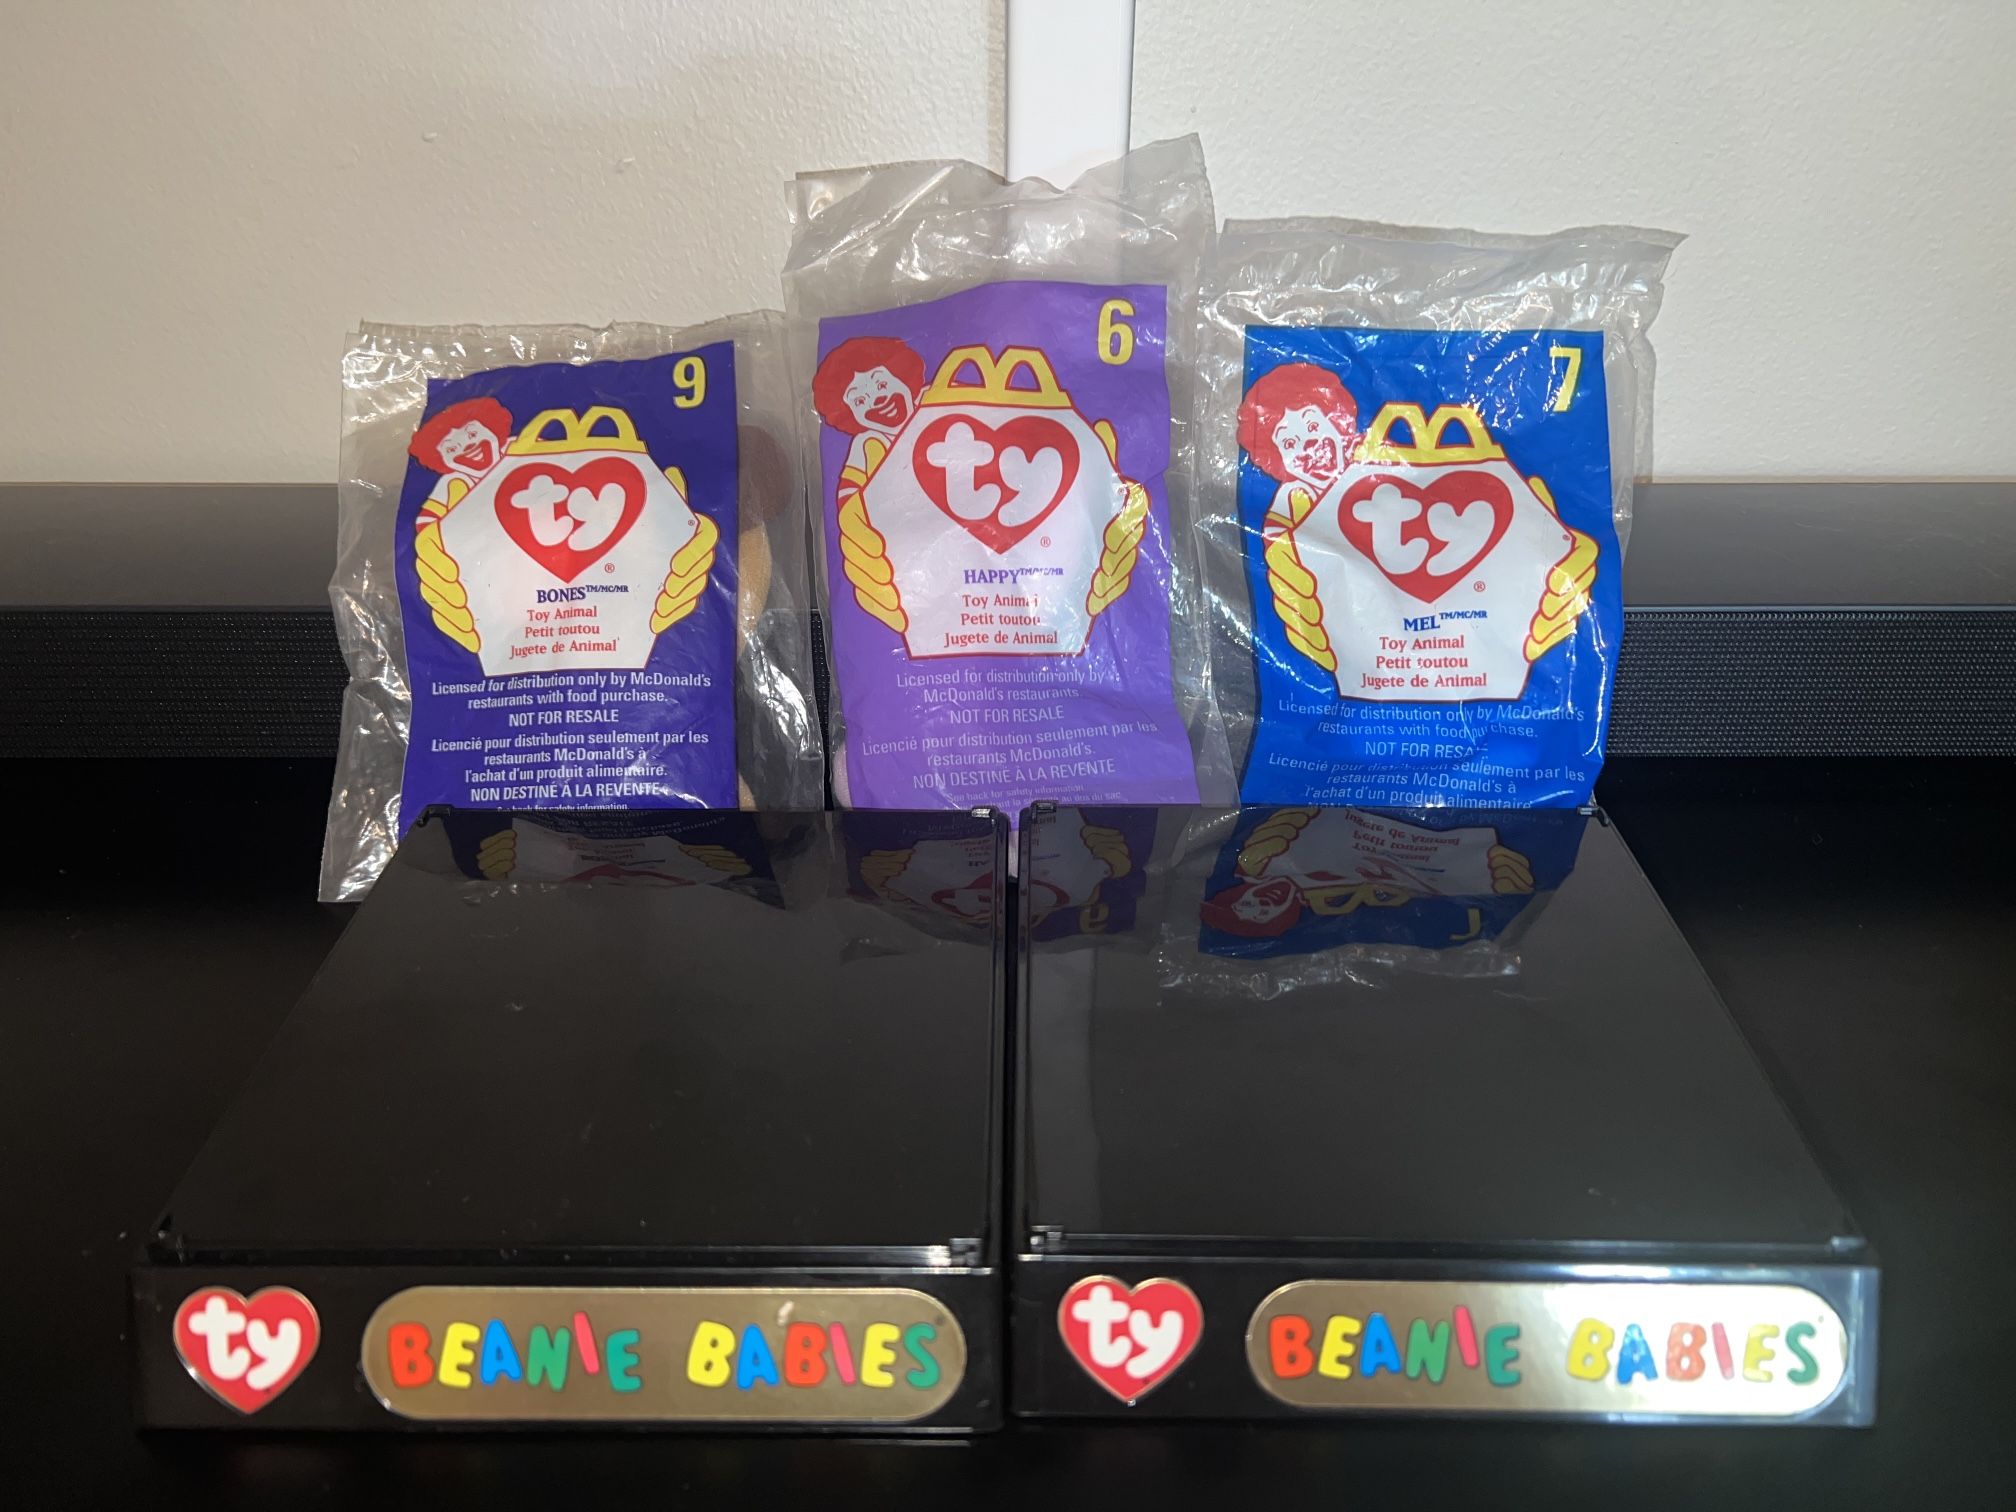 Beanie Babies : 1998 McDonald’s with Display Stands